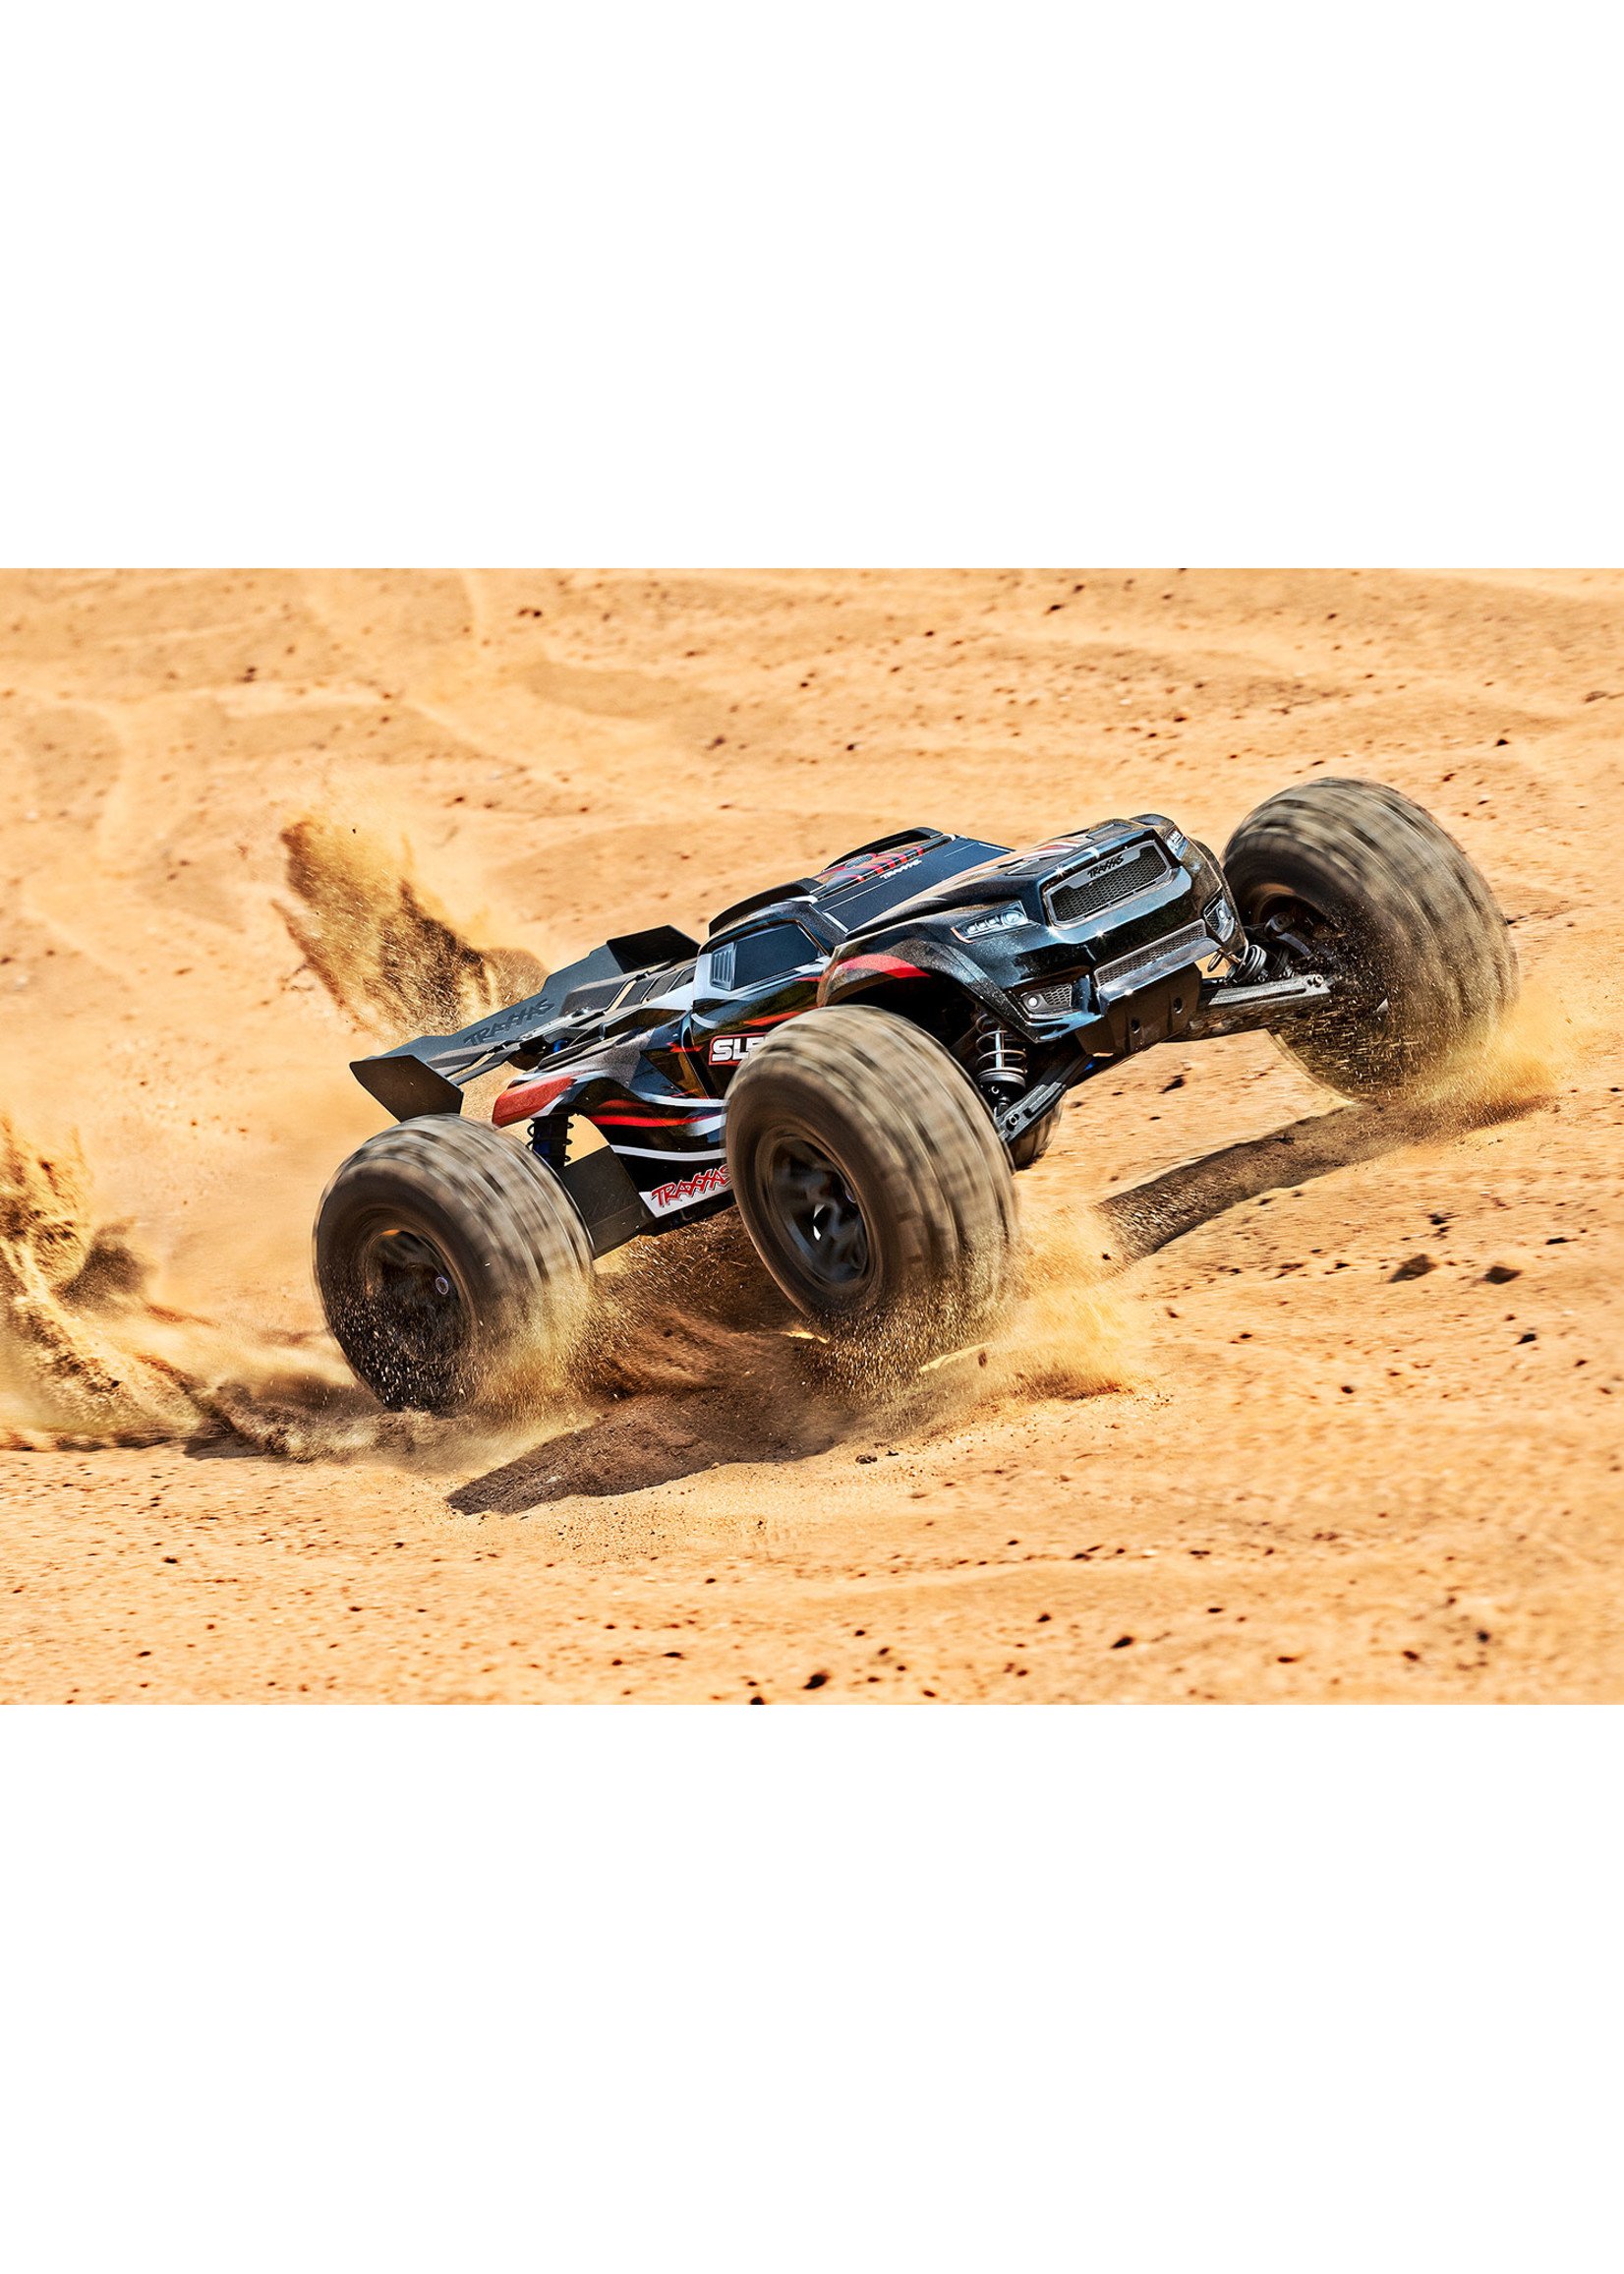 Traxxas TRA95076-4 Traxxas Sledge 1/8 Scale 4WD Monster Truck